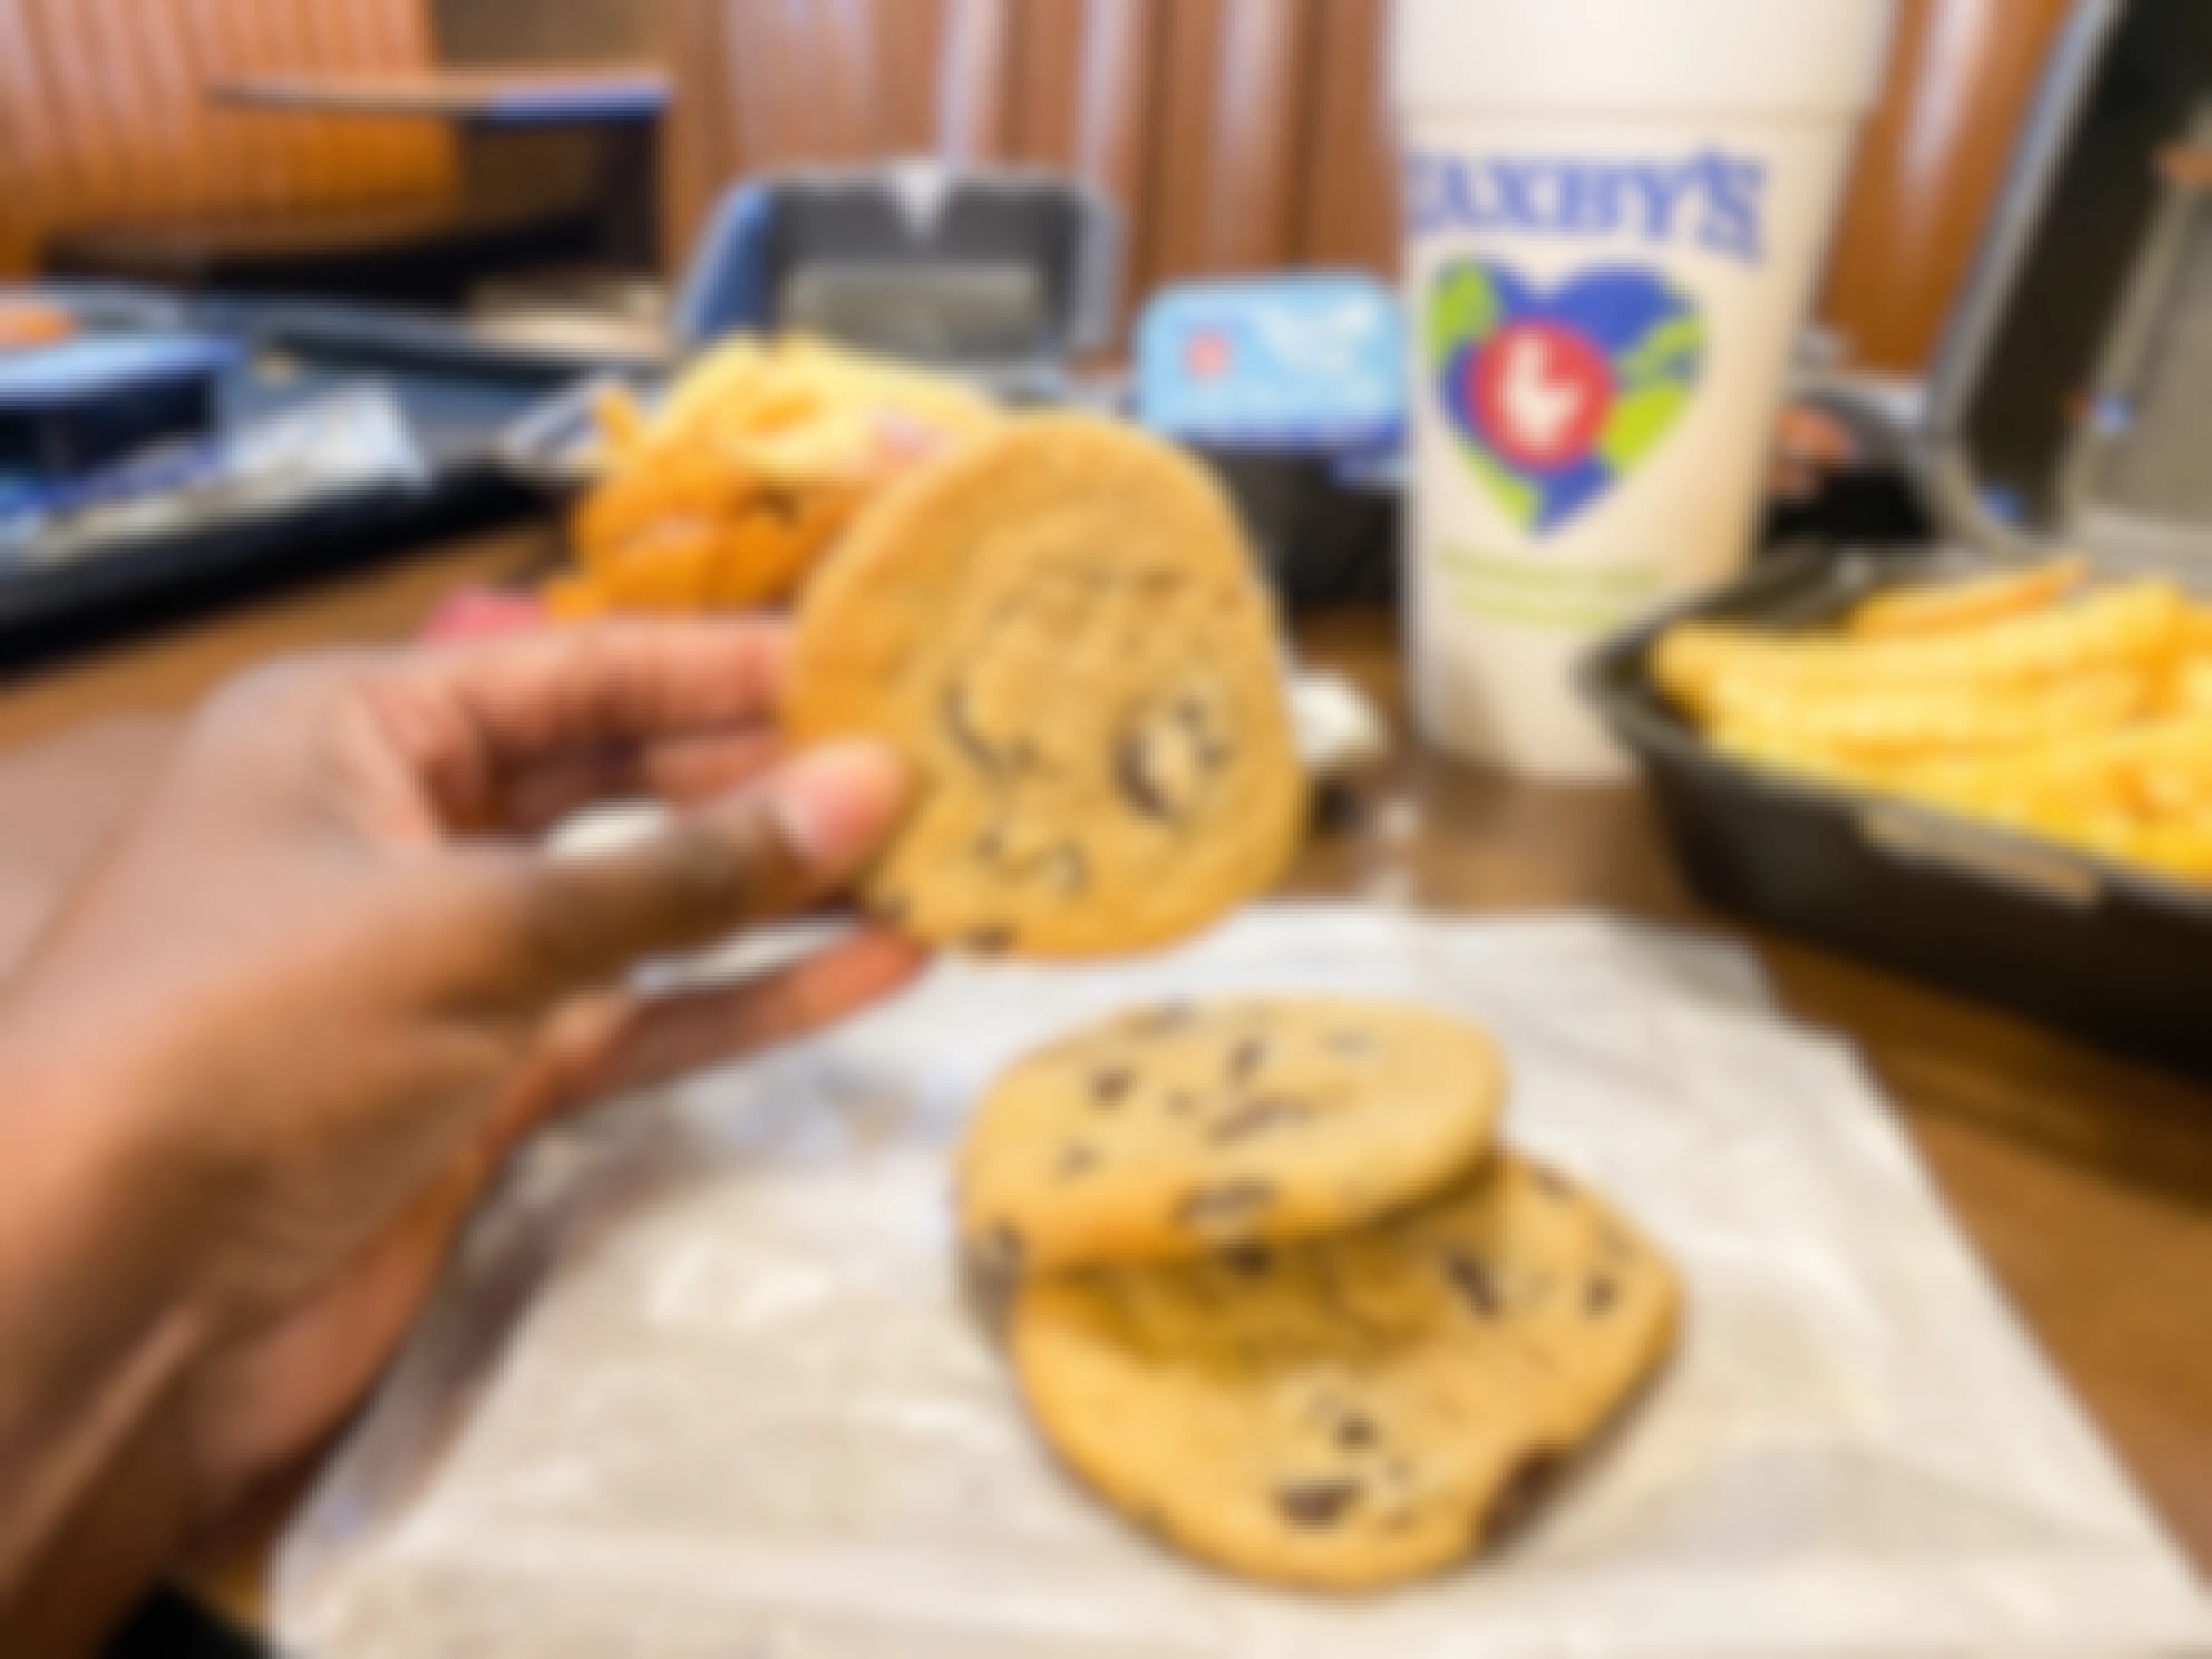 A person's hand holding a chocolate chip cookie above two more cookies on a table at Zaxby's.